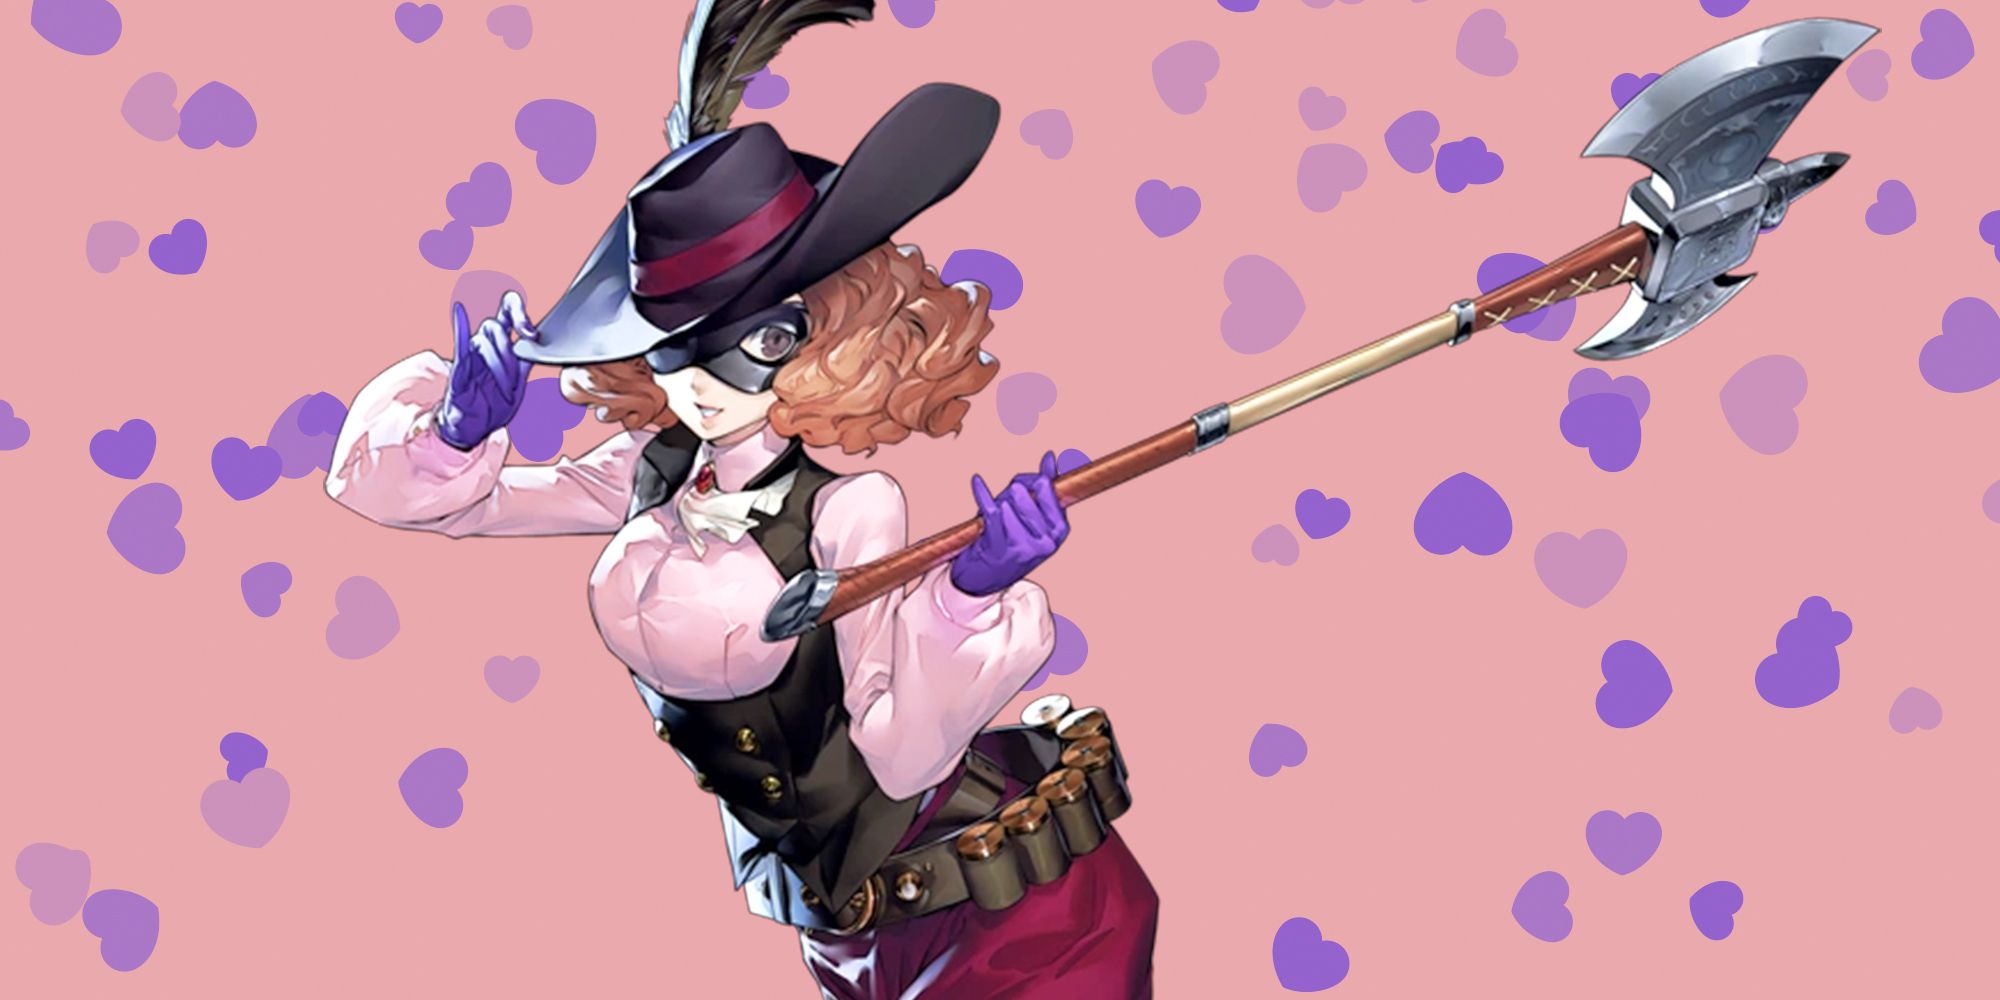 Haru from Persona 5 surrounded by love hearts